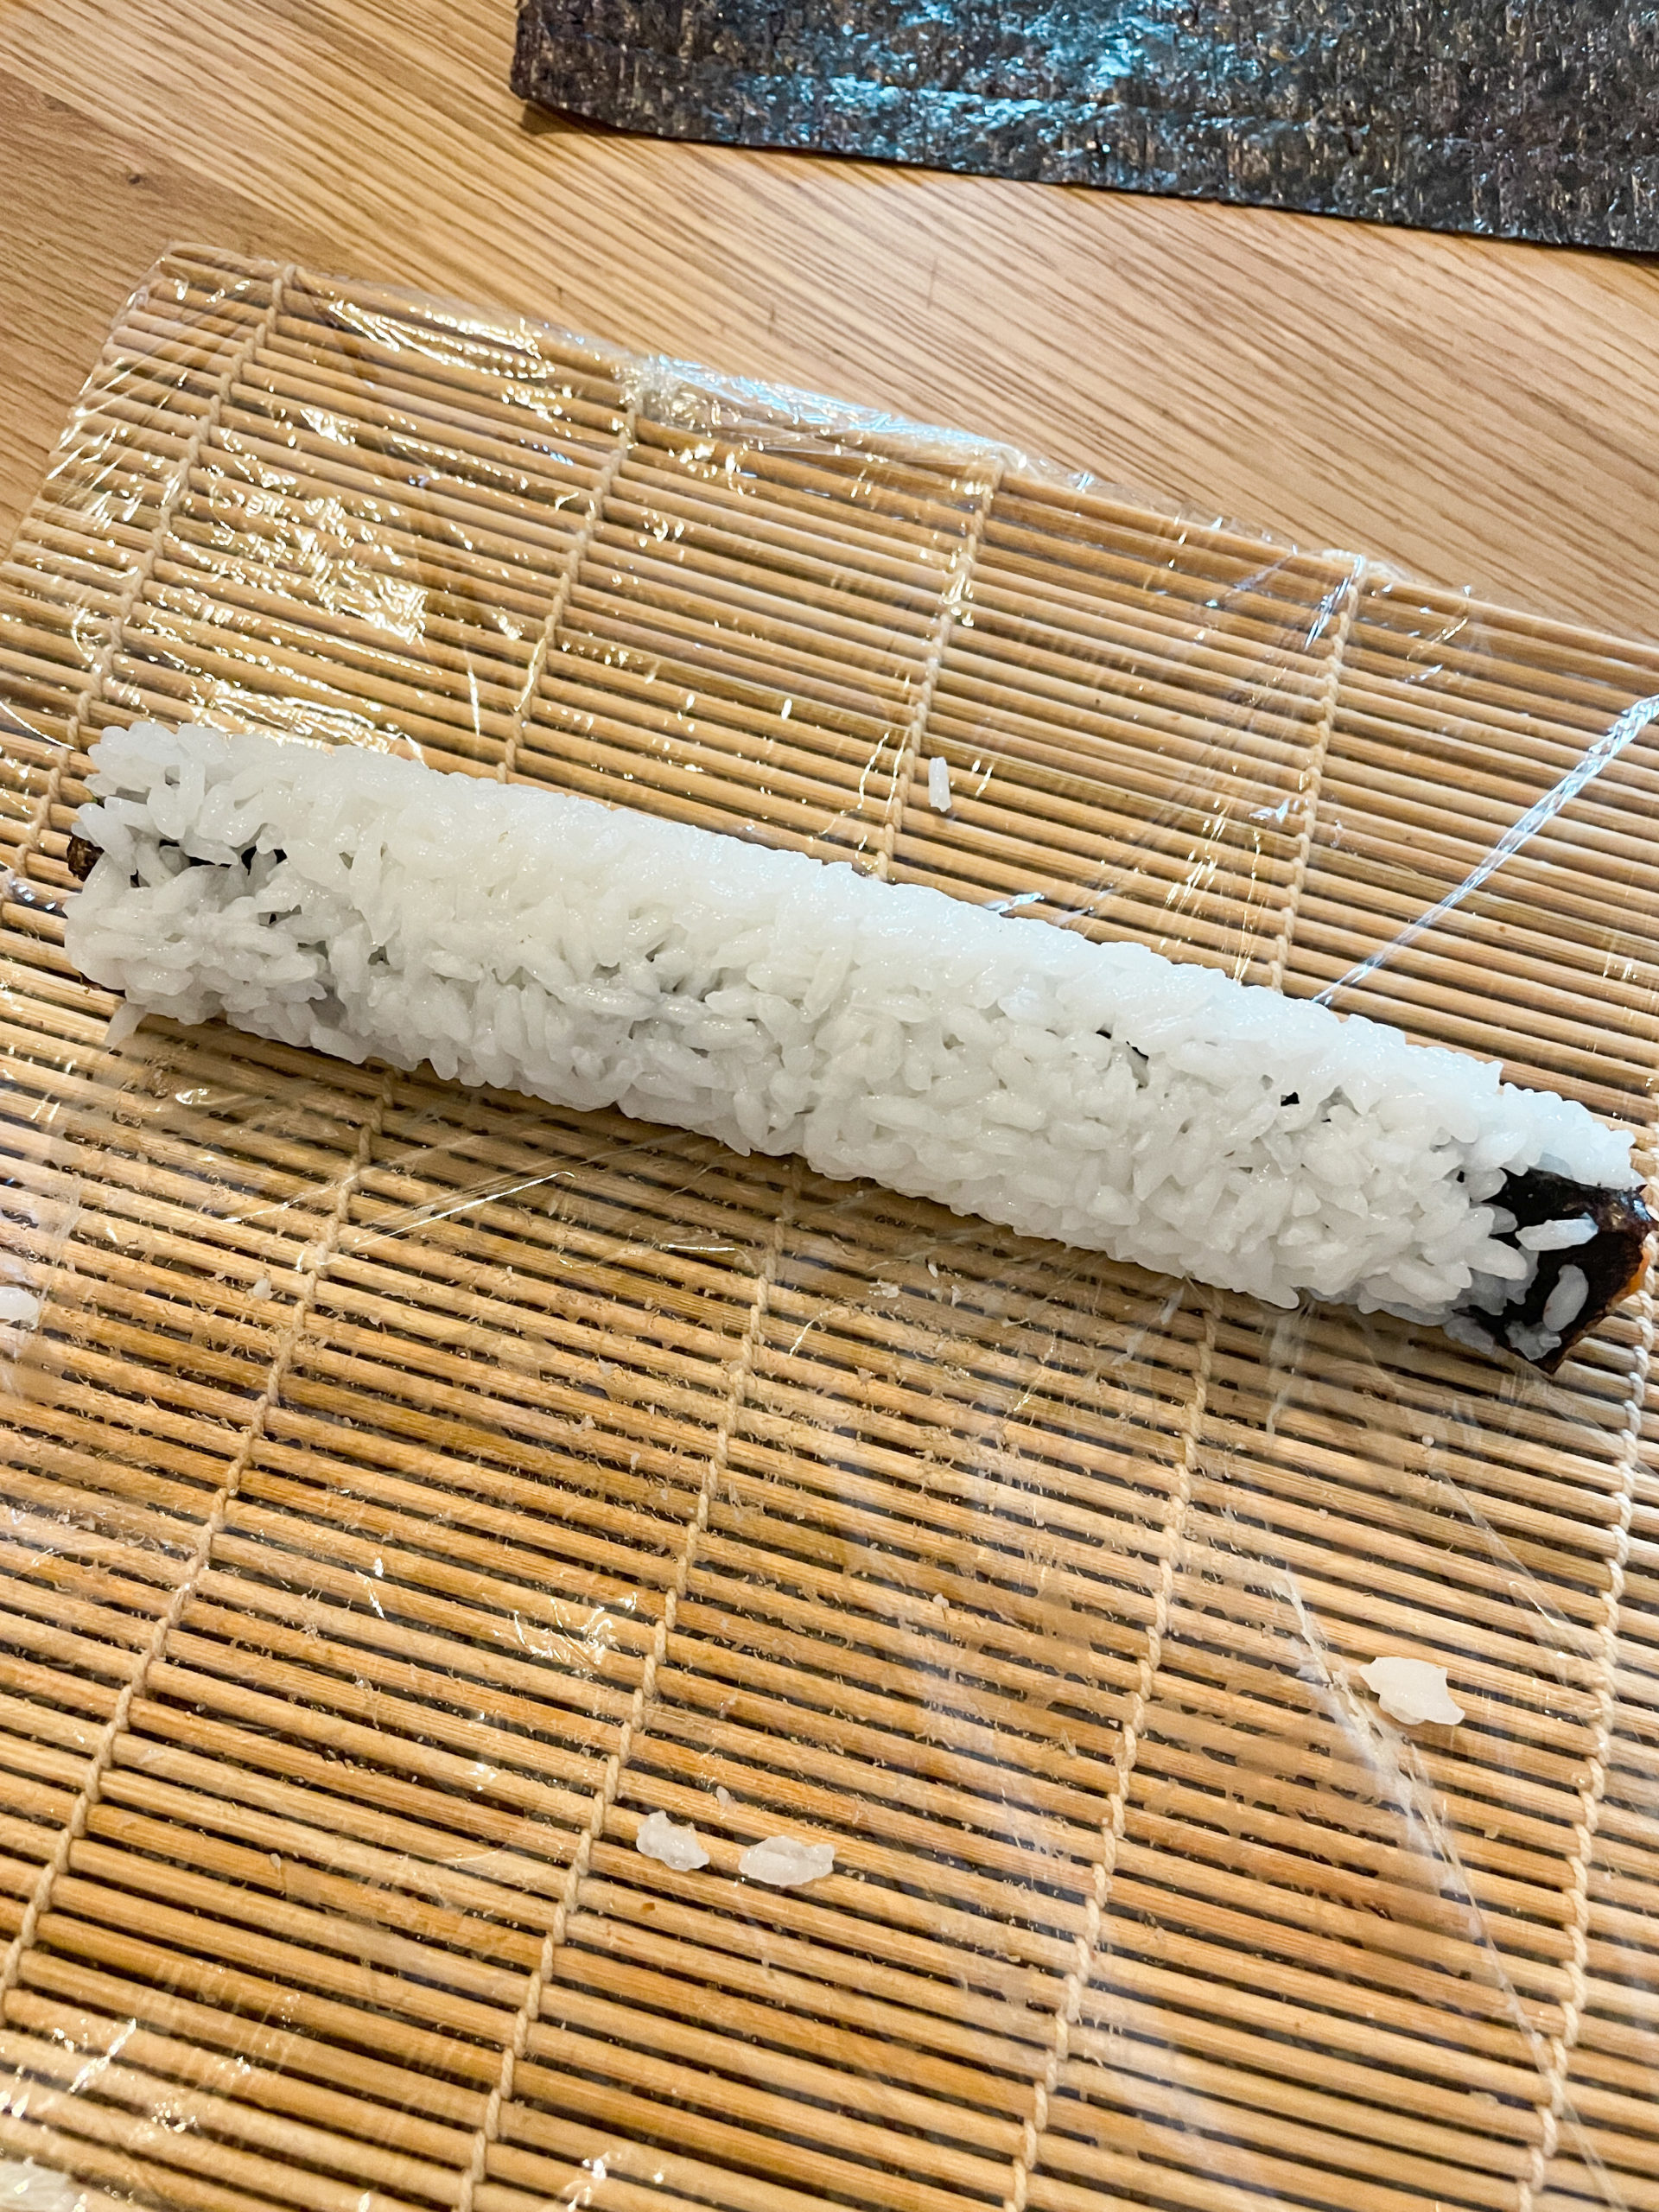 step by step instruction for rolling sushi